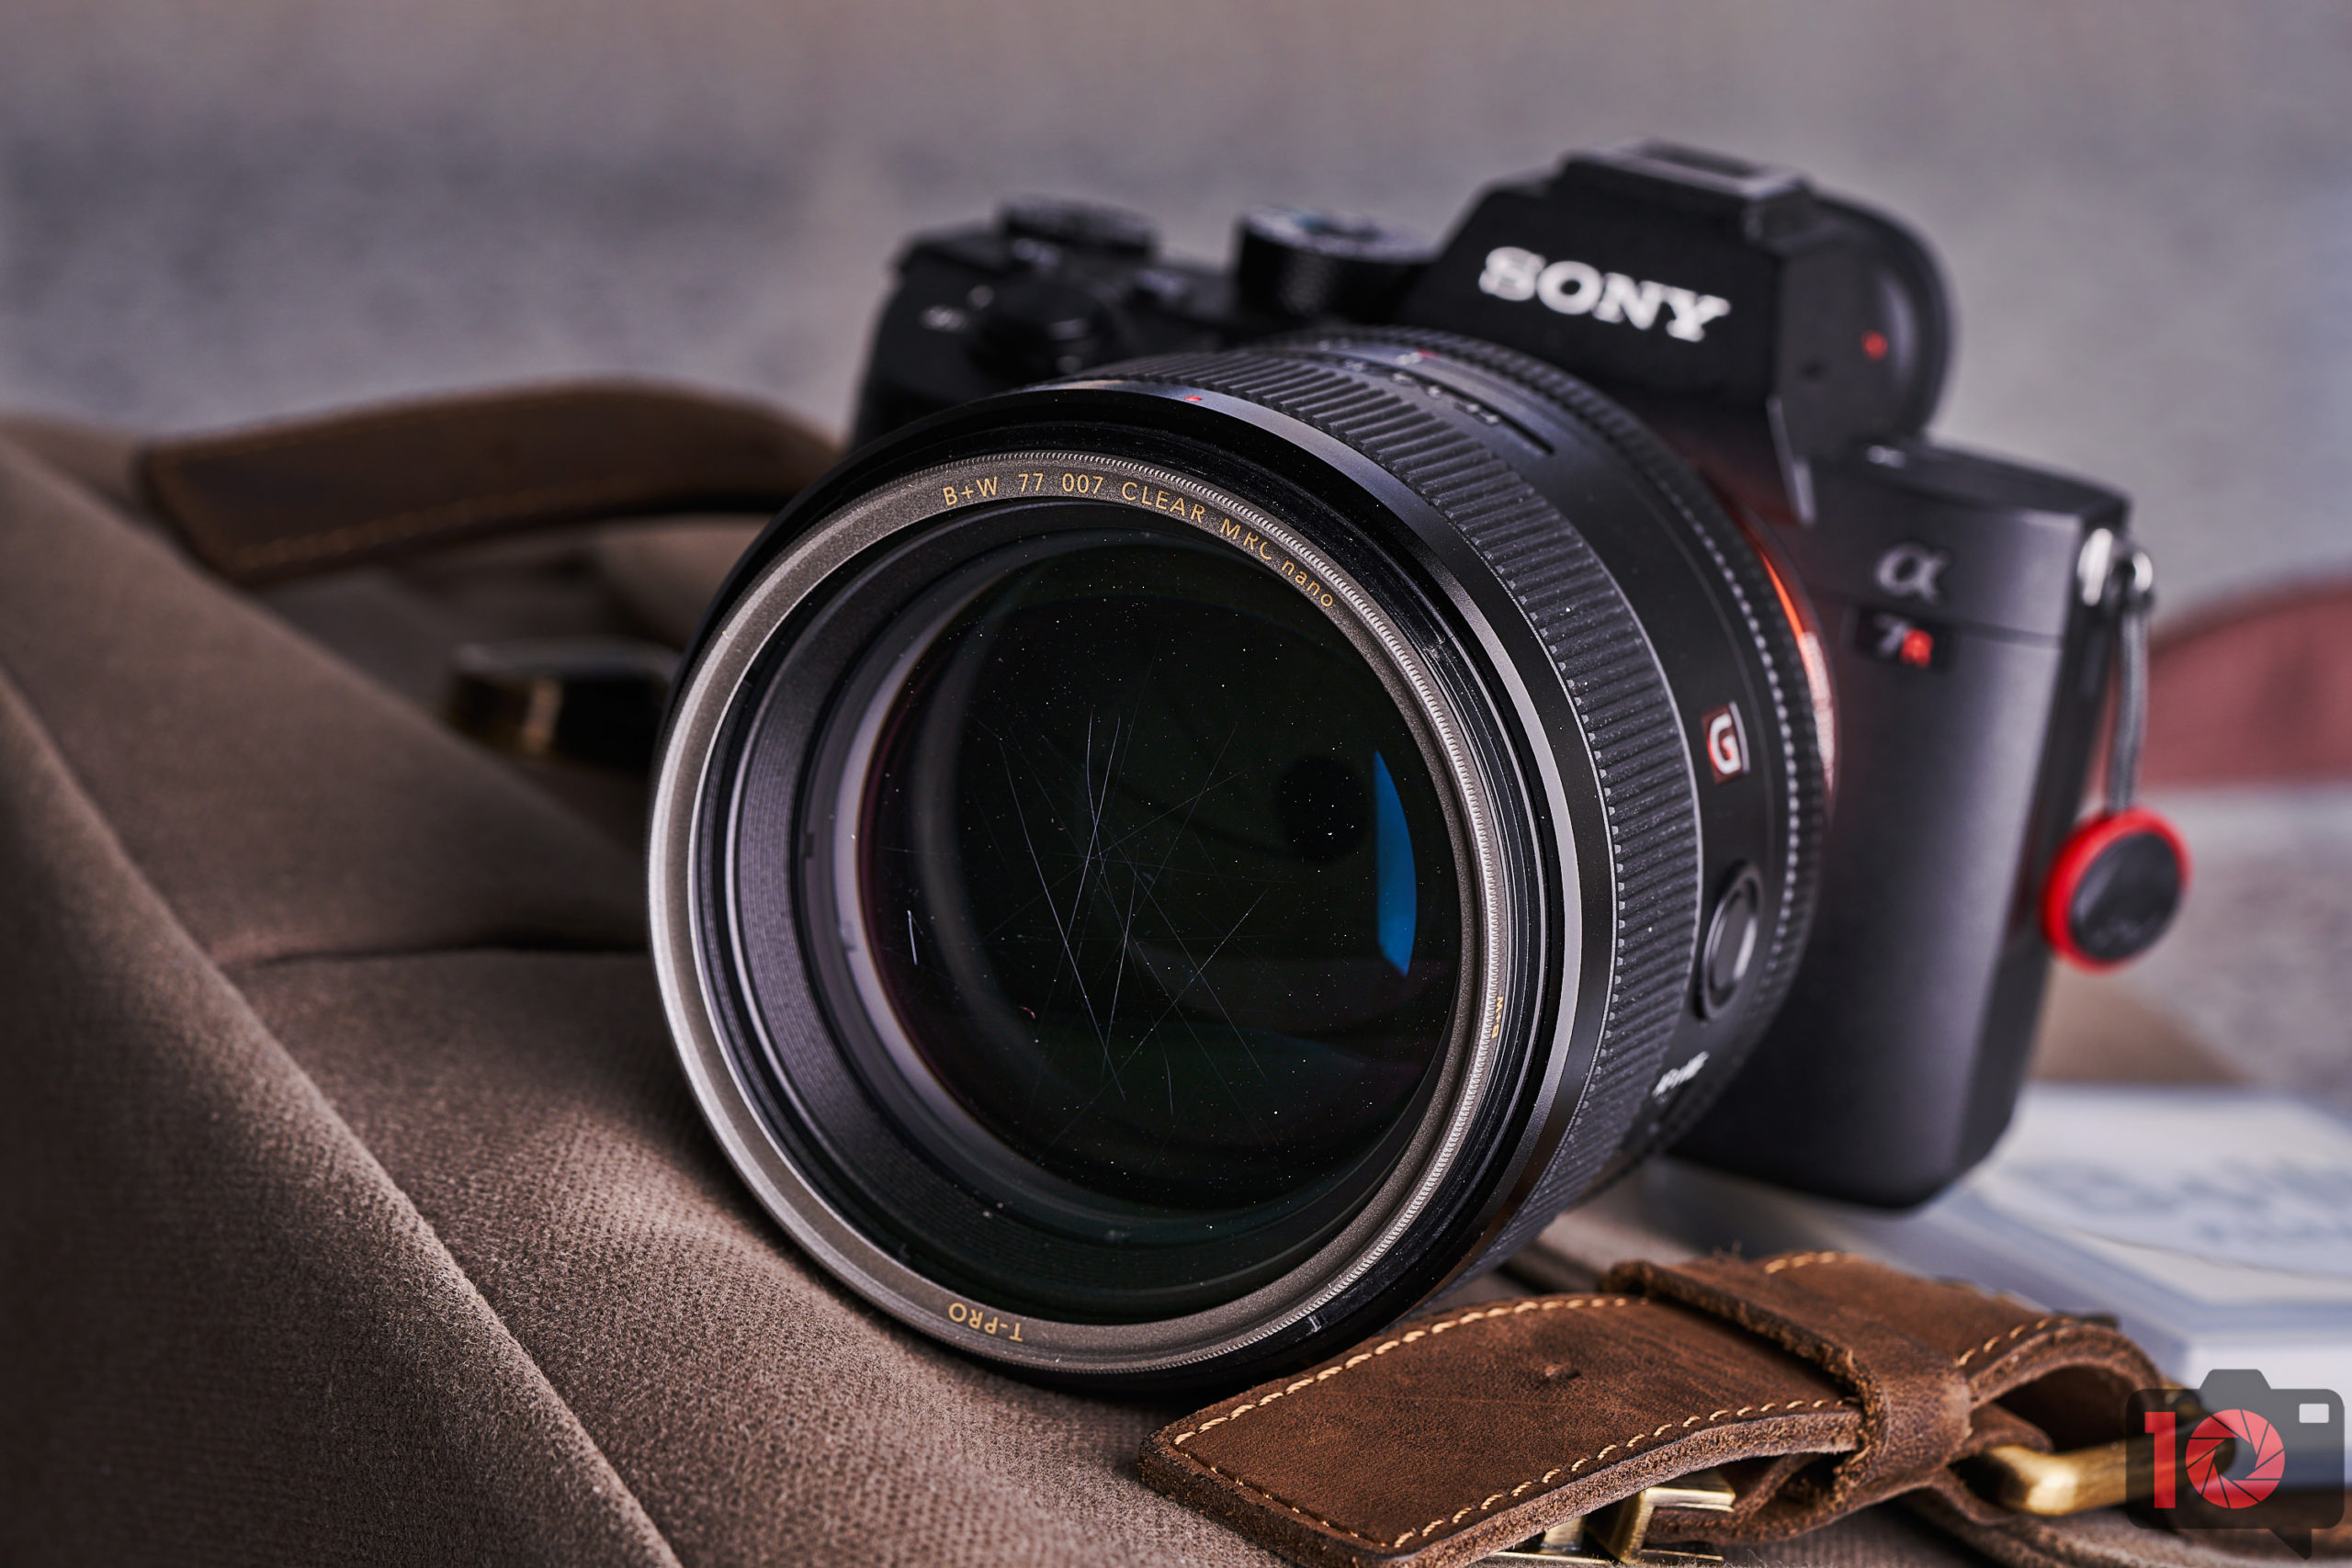 Torture Test: How Will a Protective Lens Filter Affect Image Quality?